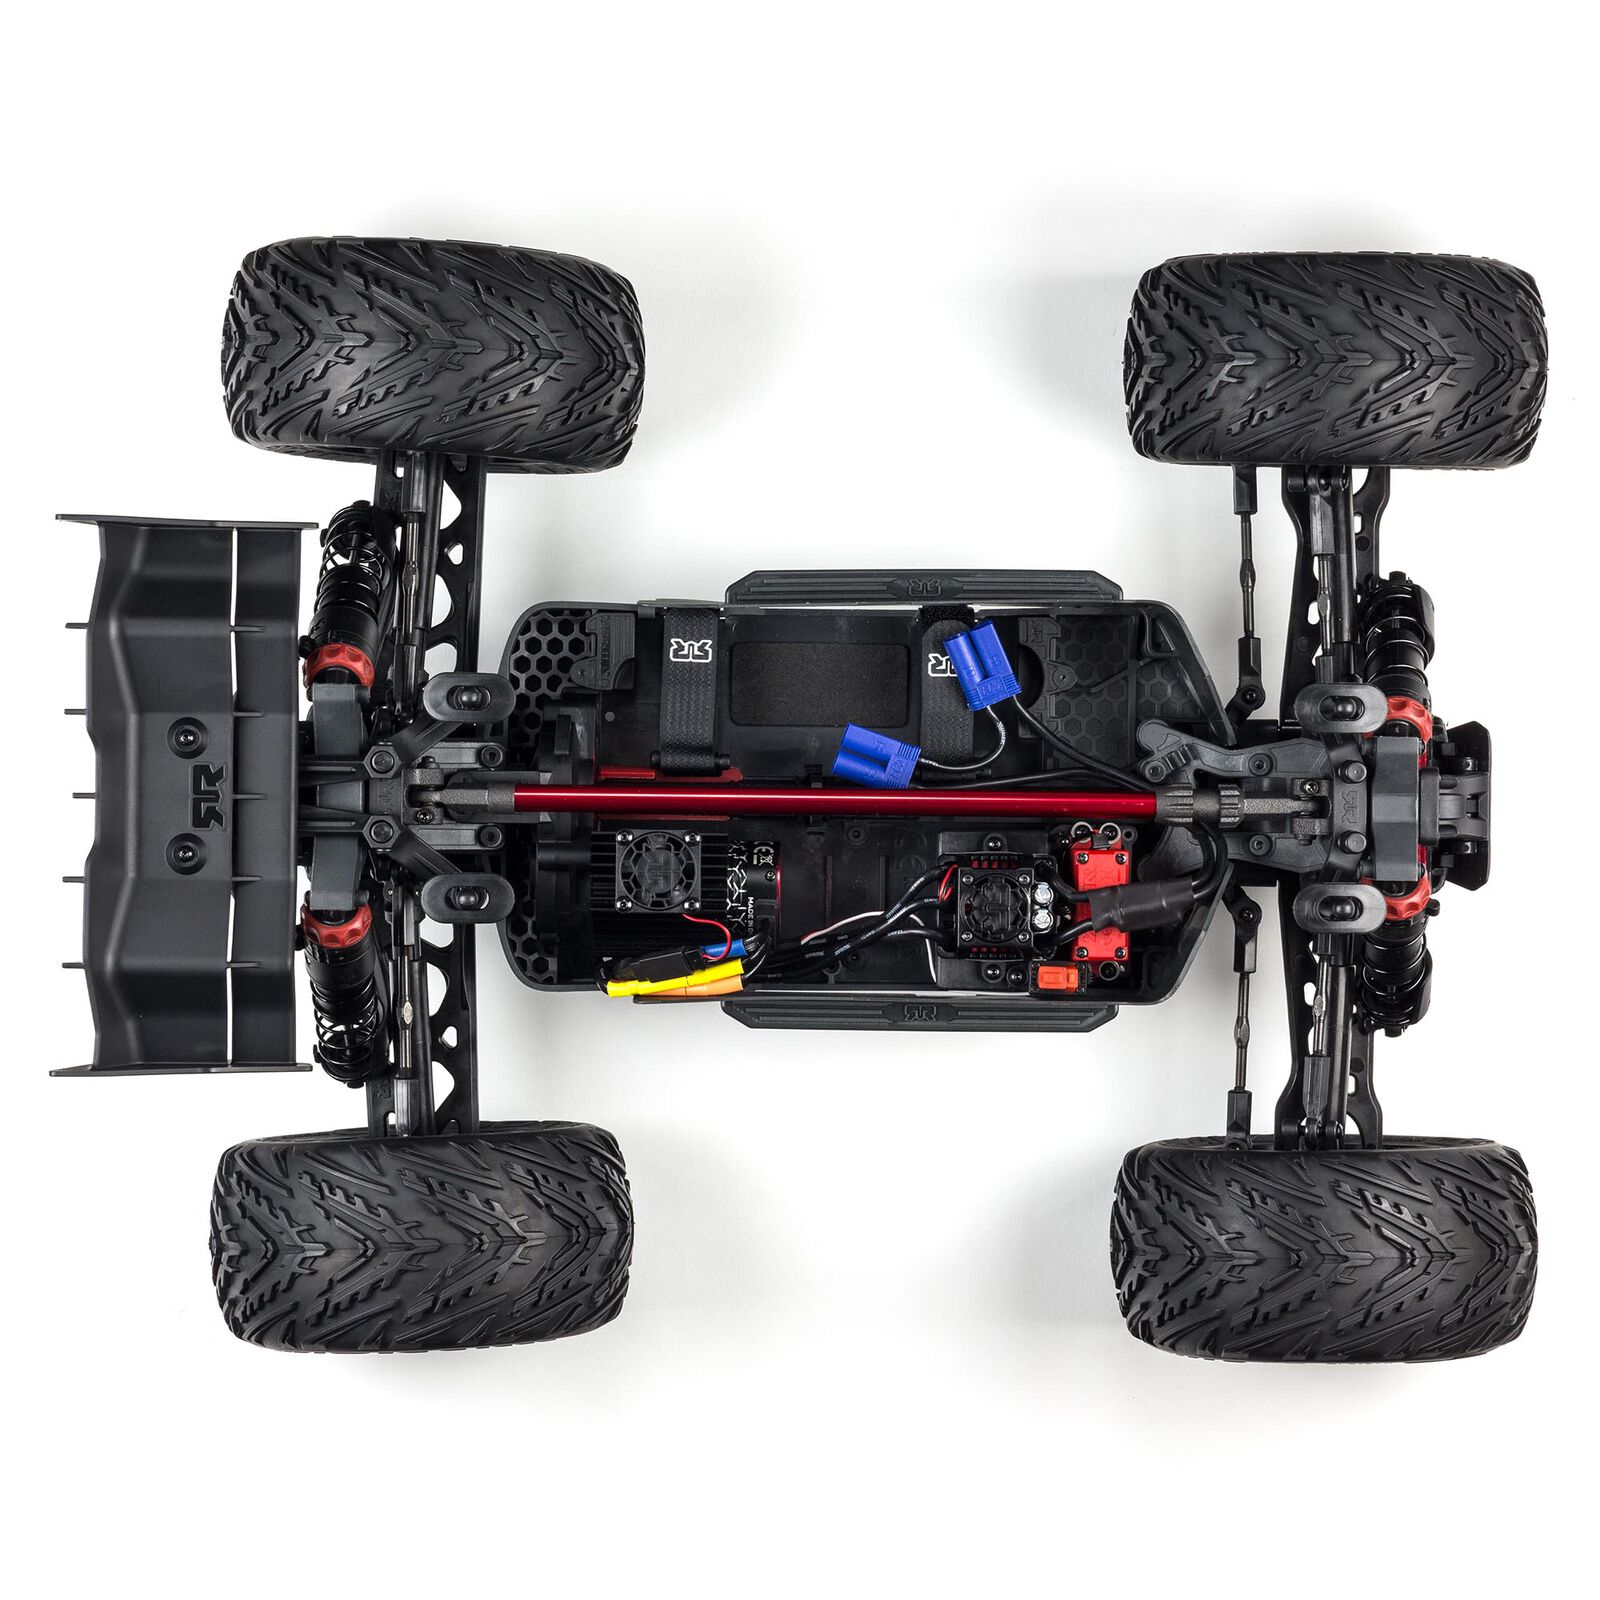 ARRMA 1/10 Kraton 4×4 4S BLX RTR FROM HORIZON HOBBY Review « Big Squid RC –  RC Car and Truck News, Reviews, Videos, and More!